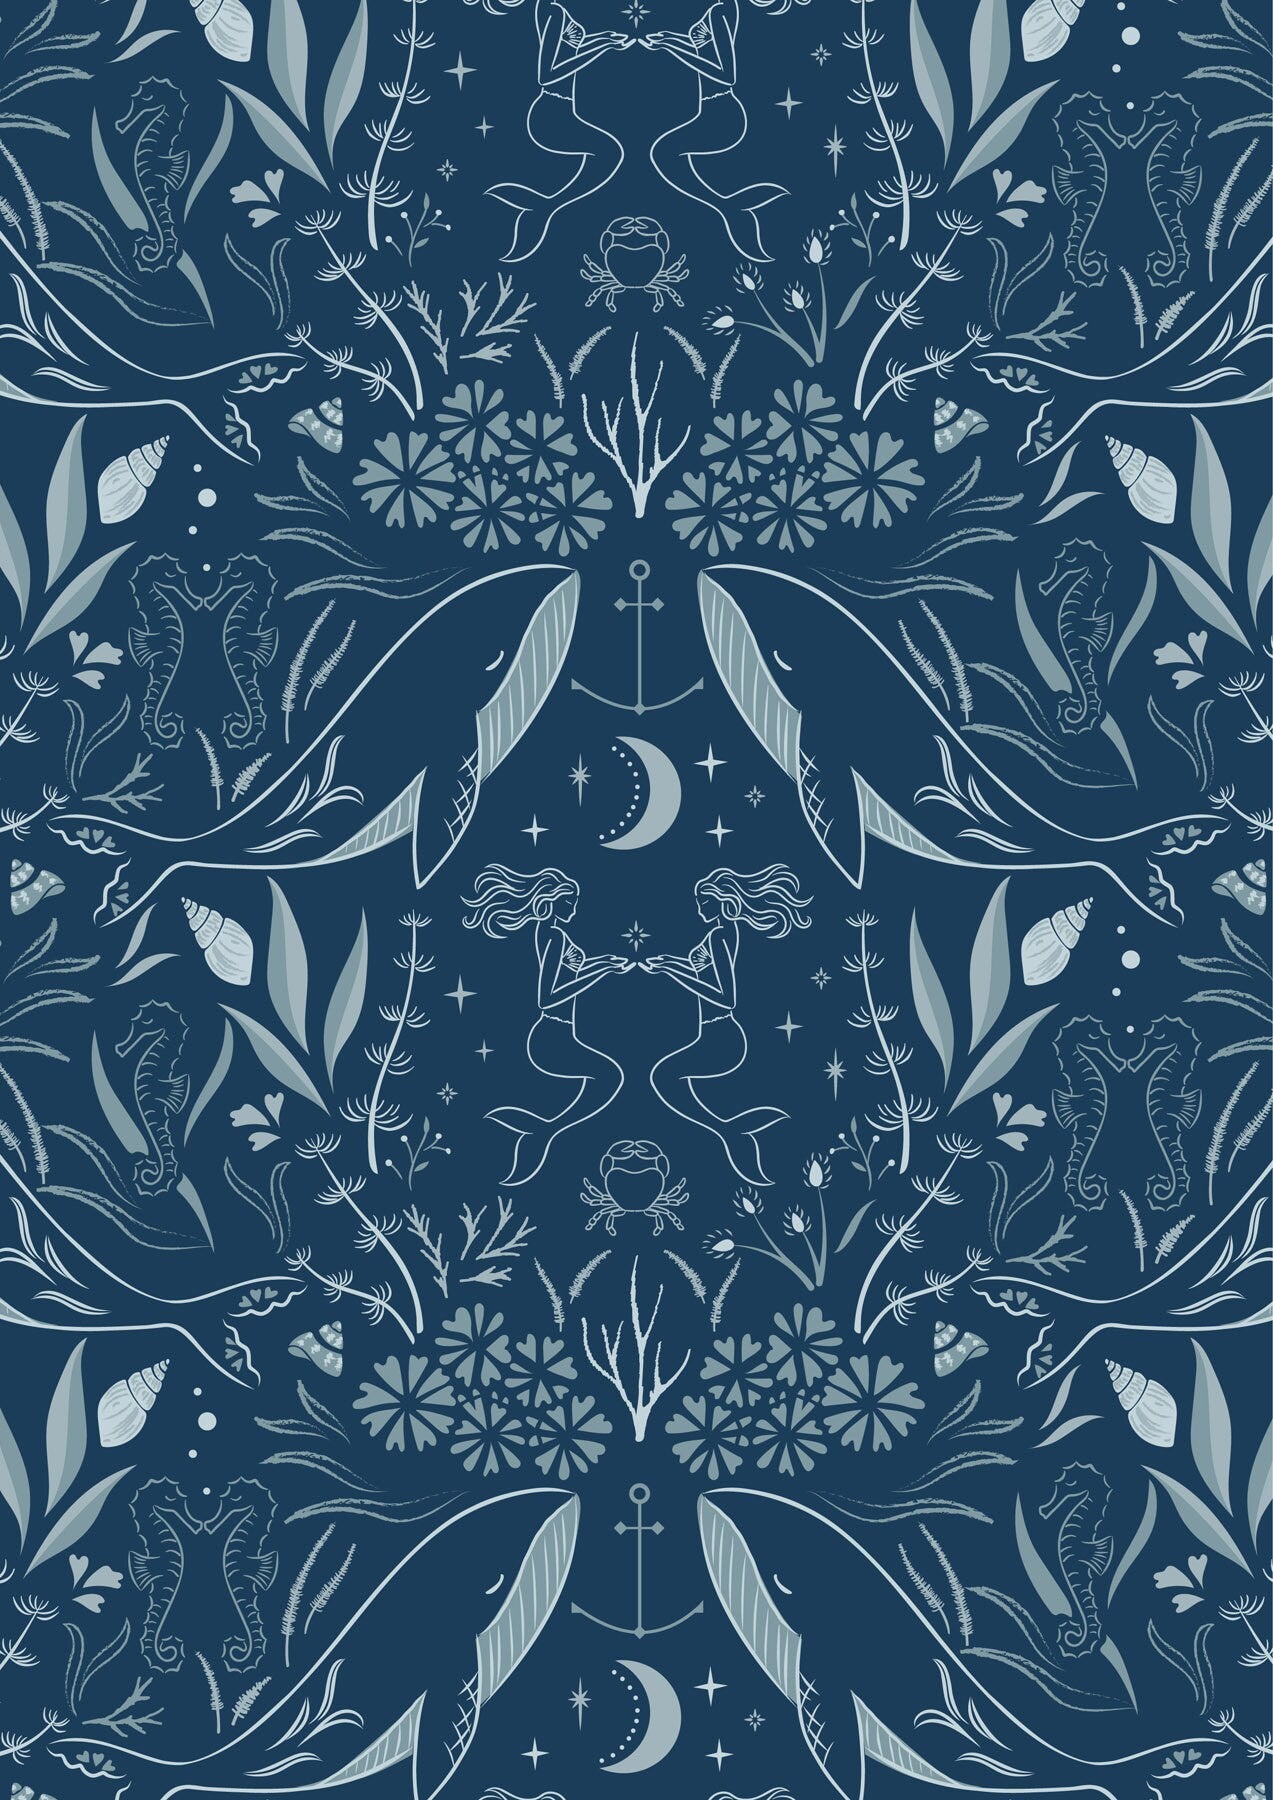 Enchanted Ocean, Midnight Blue, CC12.3, Lewis & Irene Fabric, Sounds of the Sea, Quilt Fabric, Cotton Fabric, Nautical, Fabric By the Yard